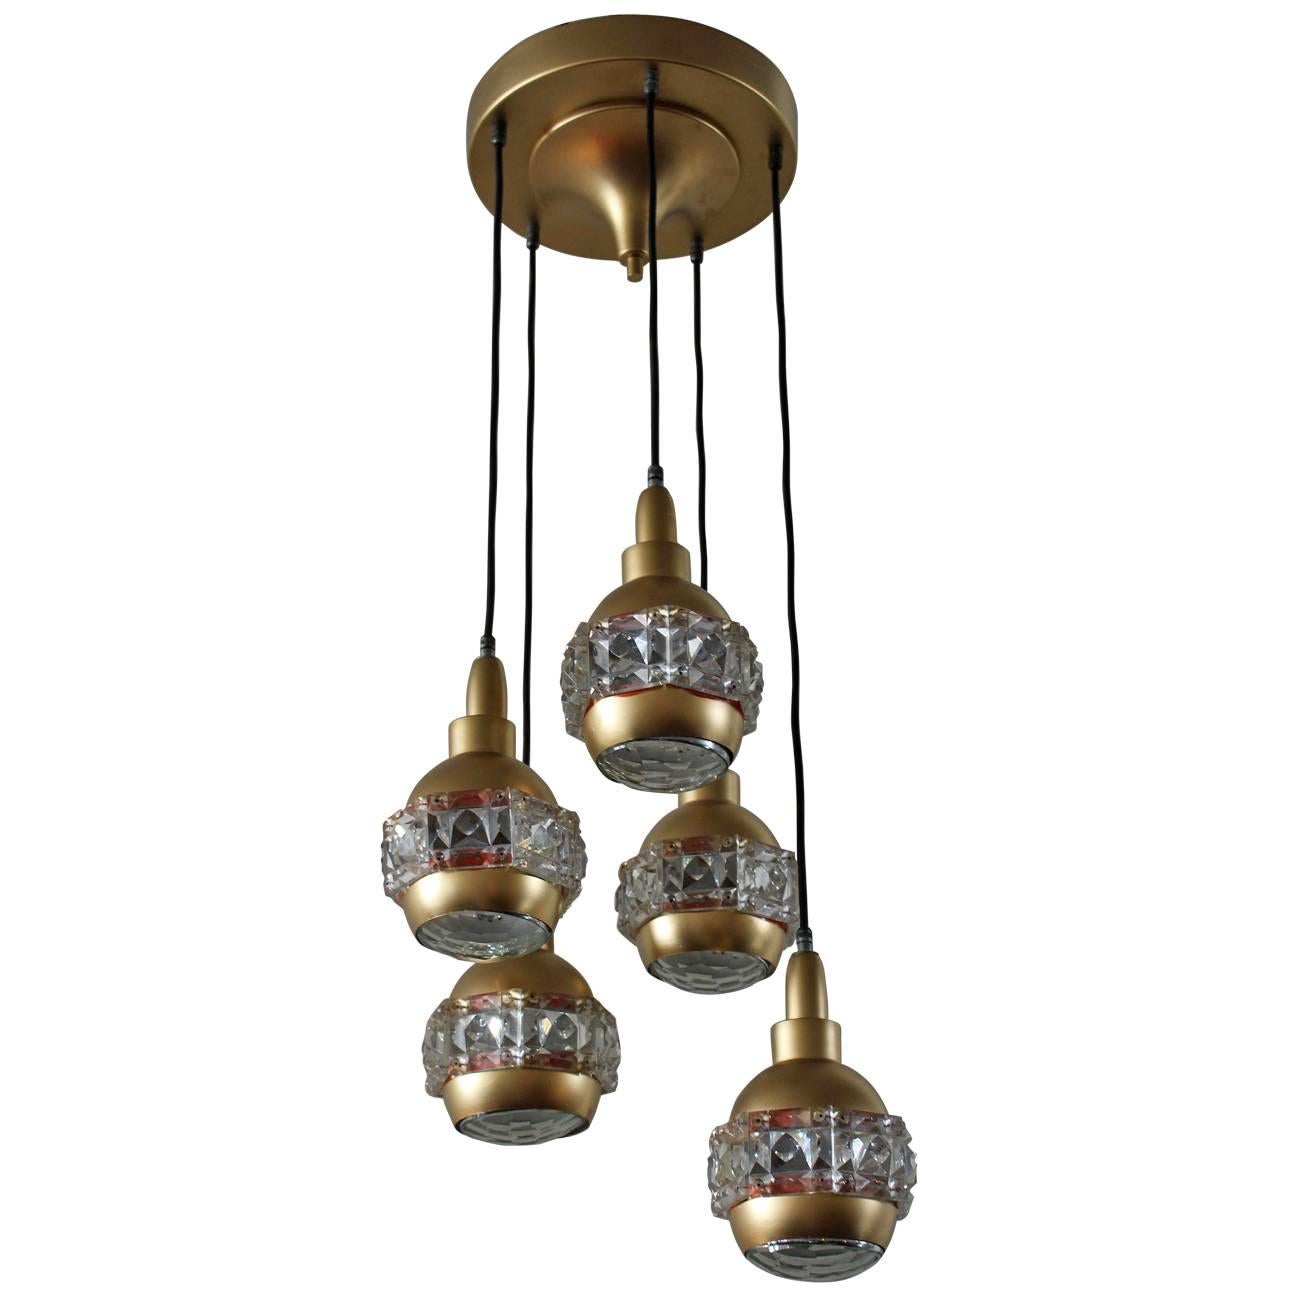 Italian Midcentury Chandelier Attributed to O'luce For Sale